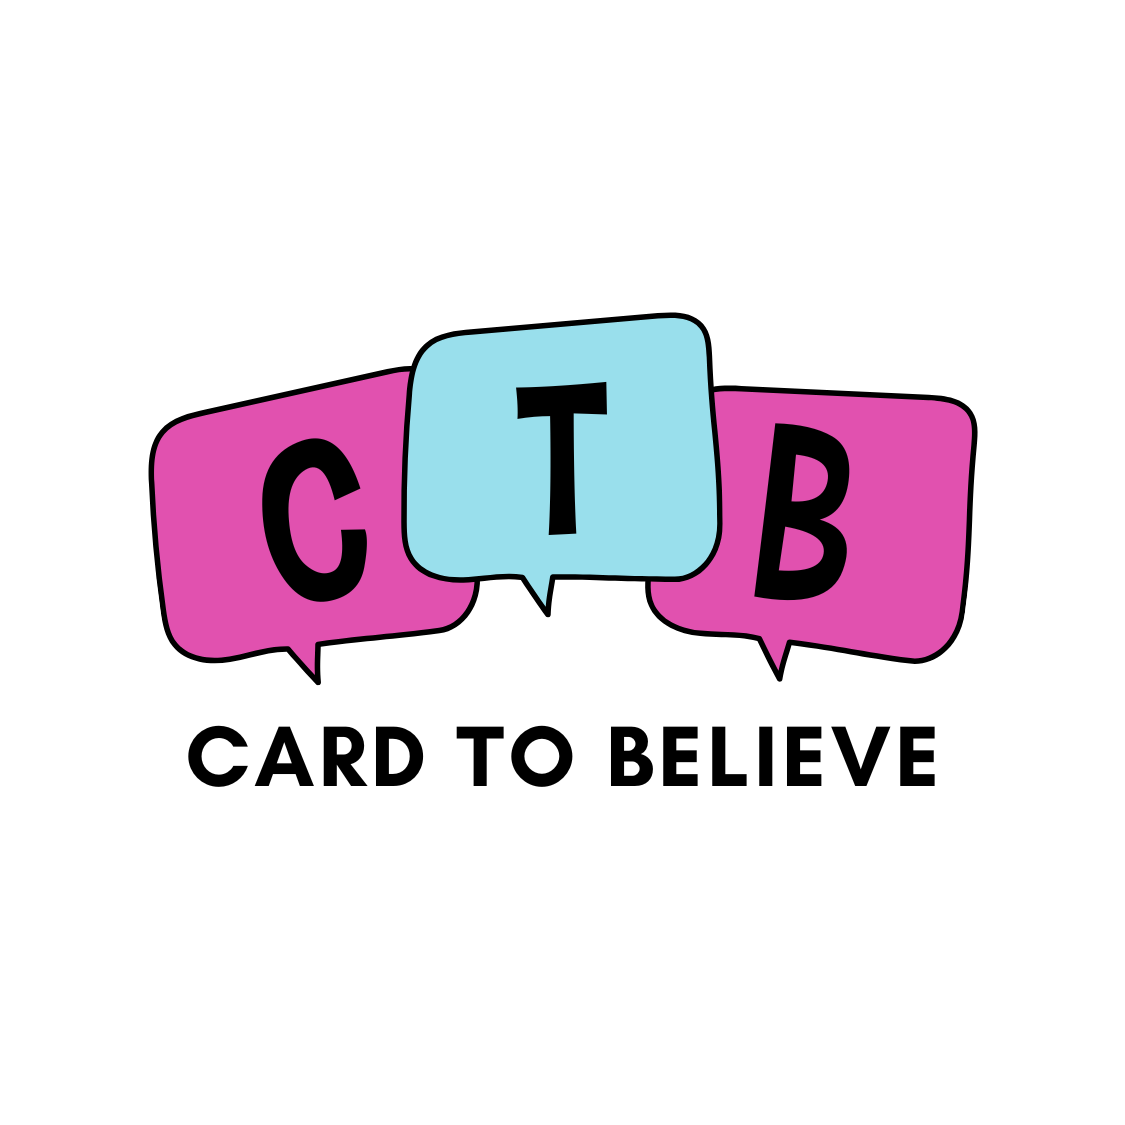 CARD TO BELIEVE